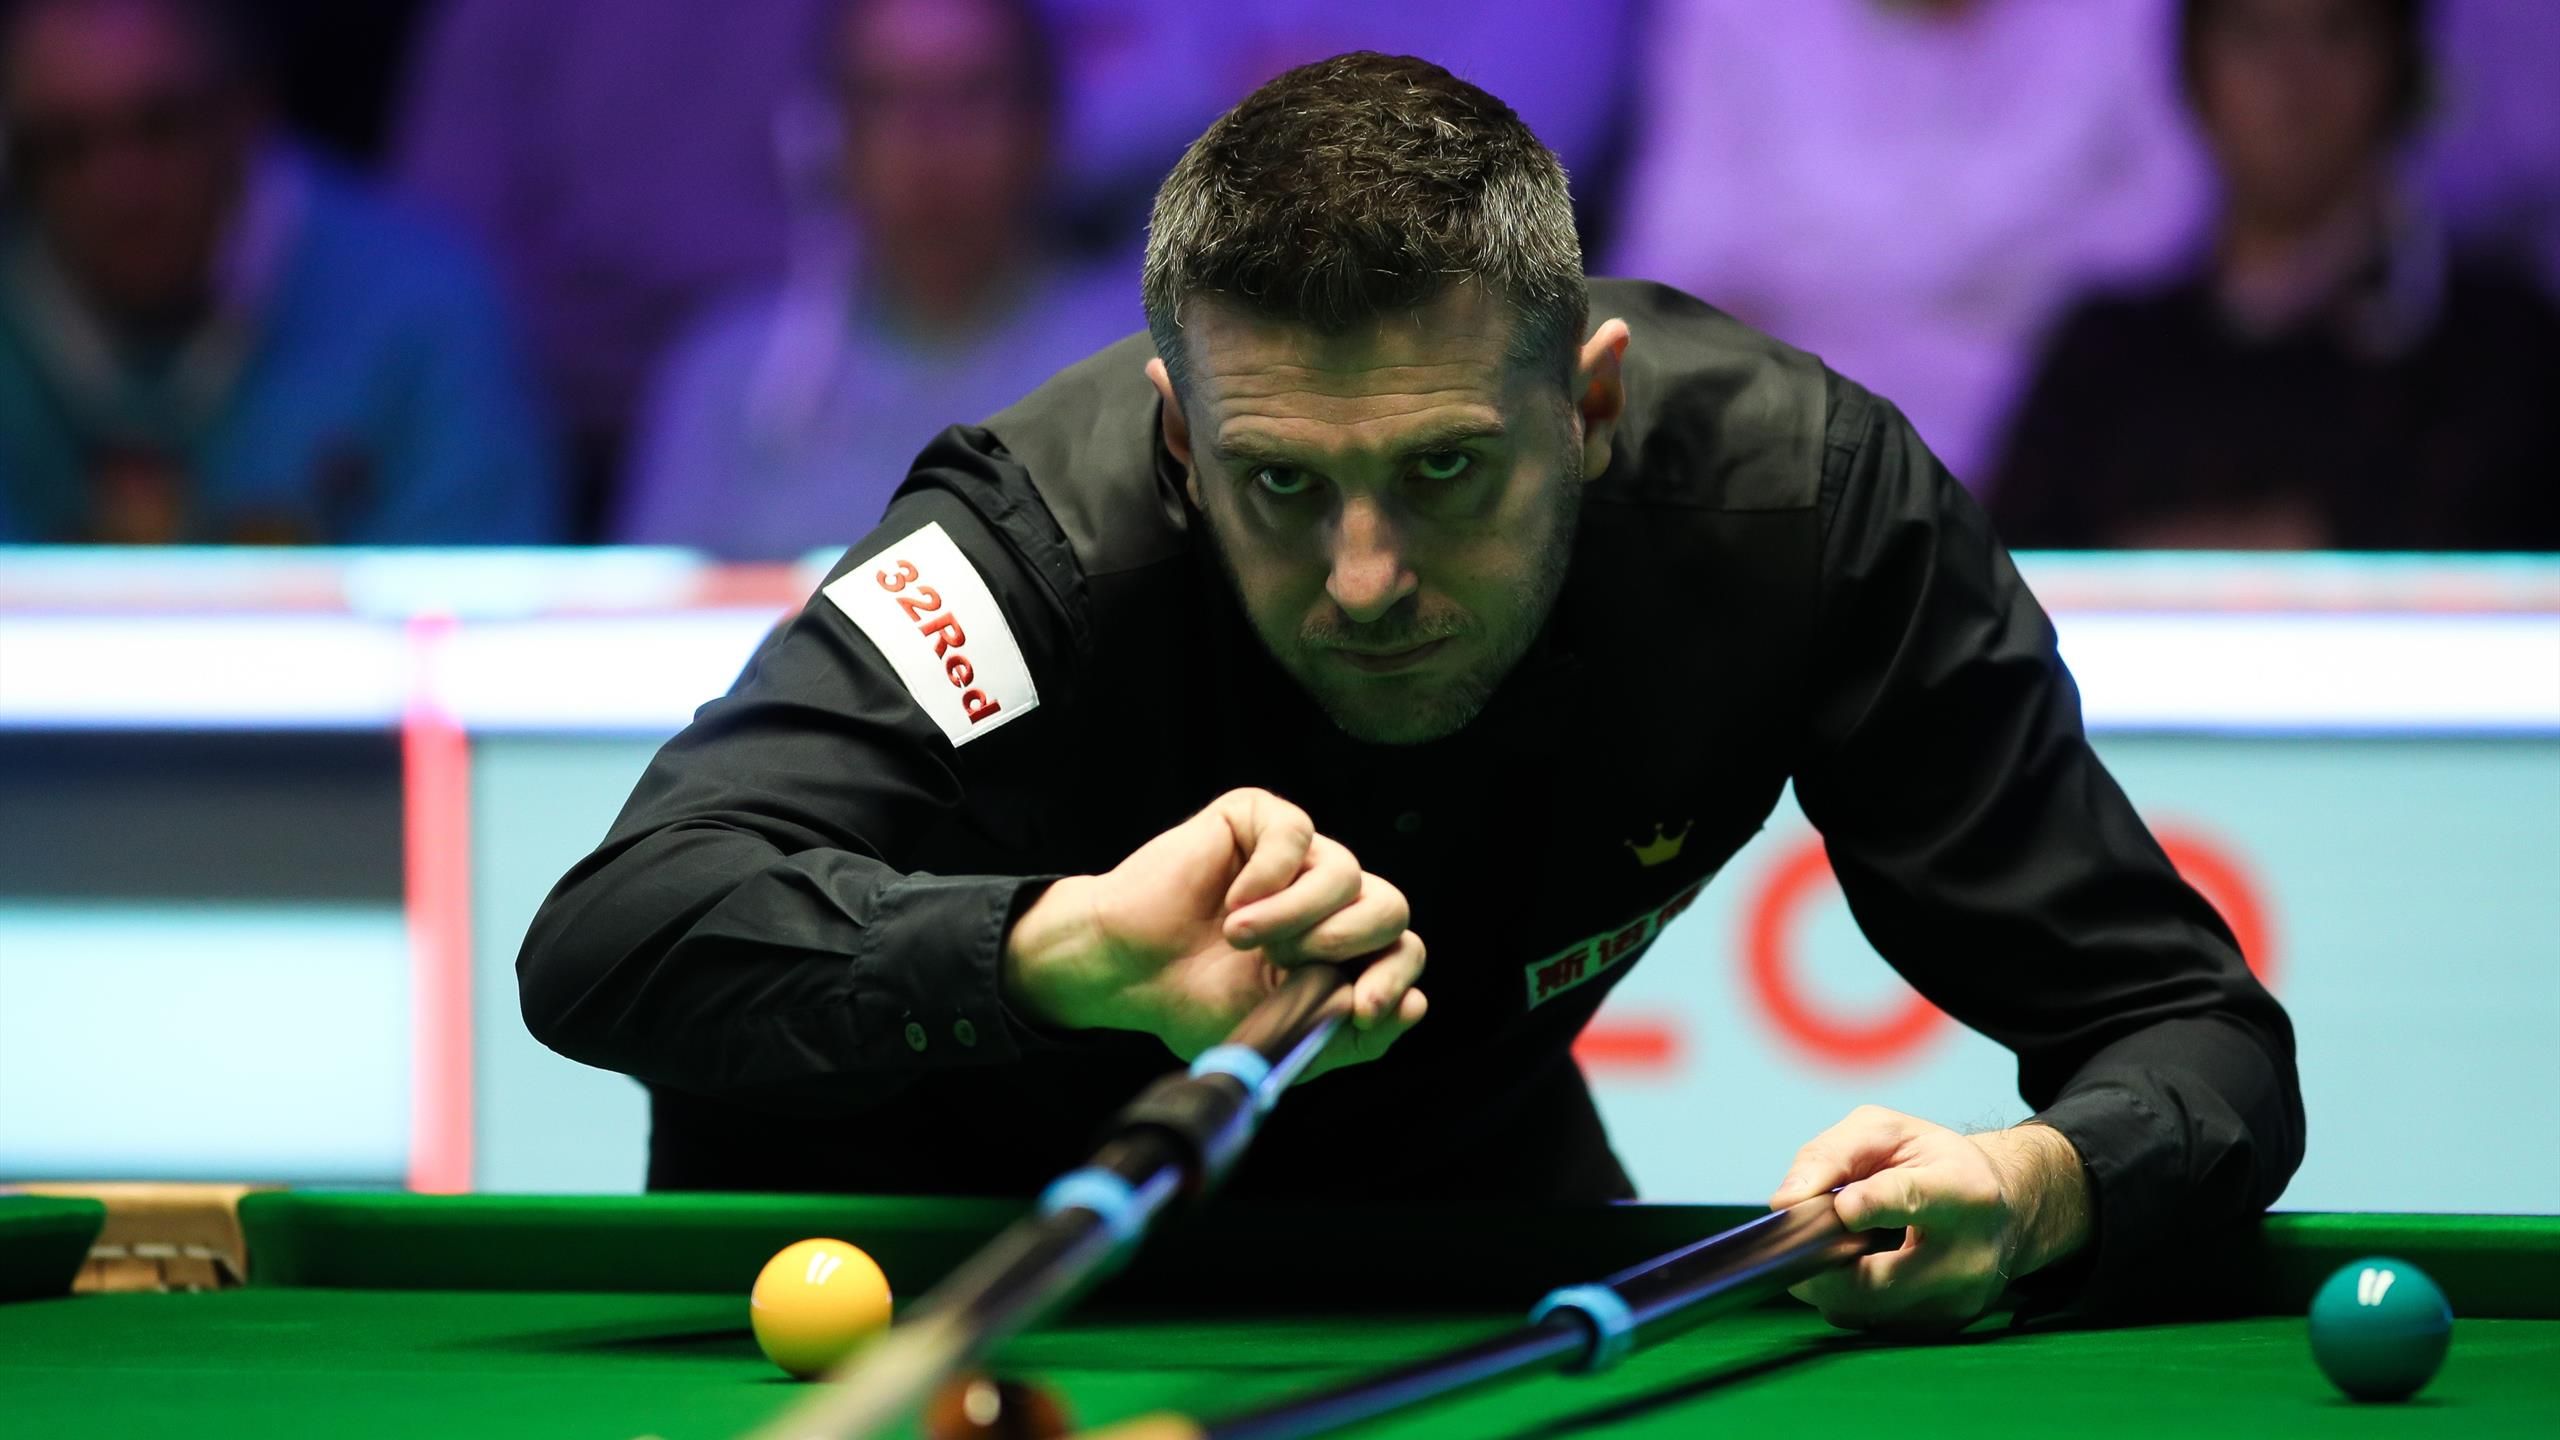 English Open 2022 snooker as it happened - Mark Selby clinches title with victory over Luca Brecel in final